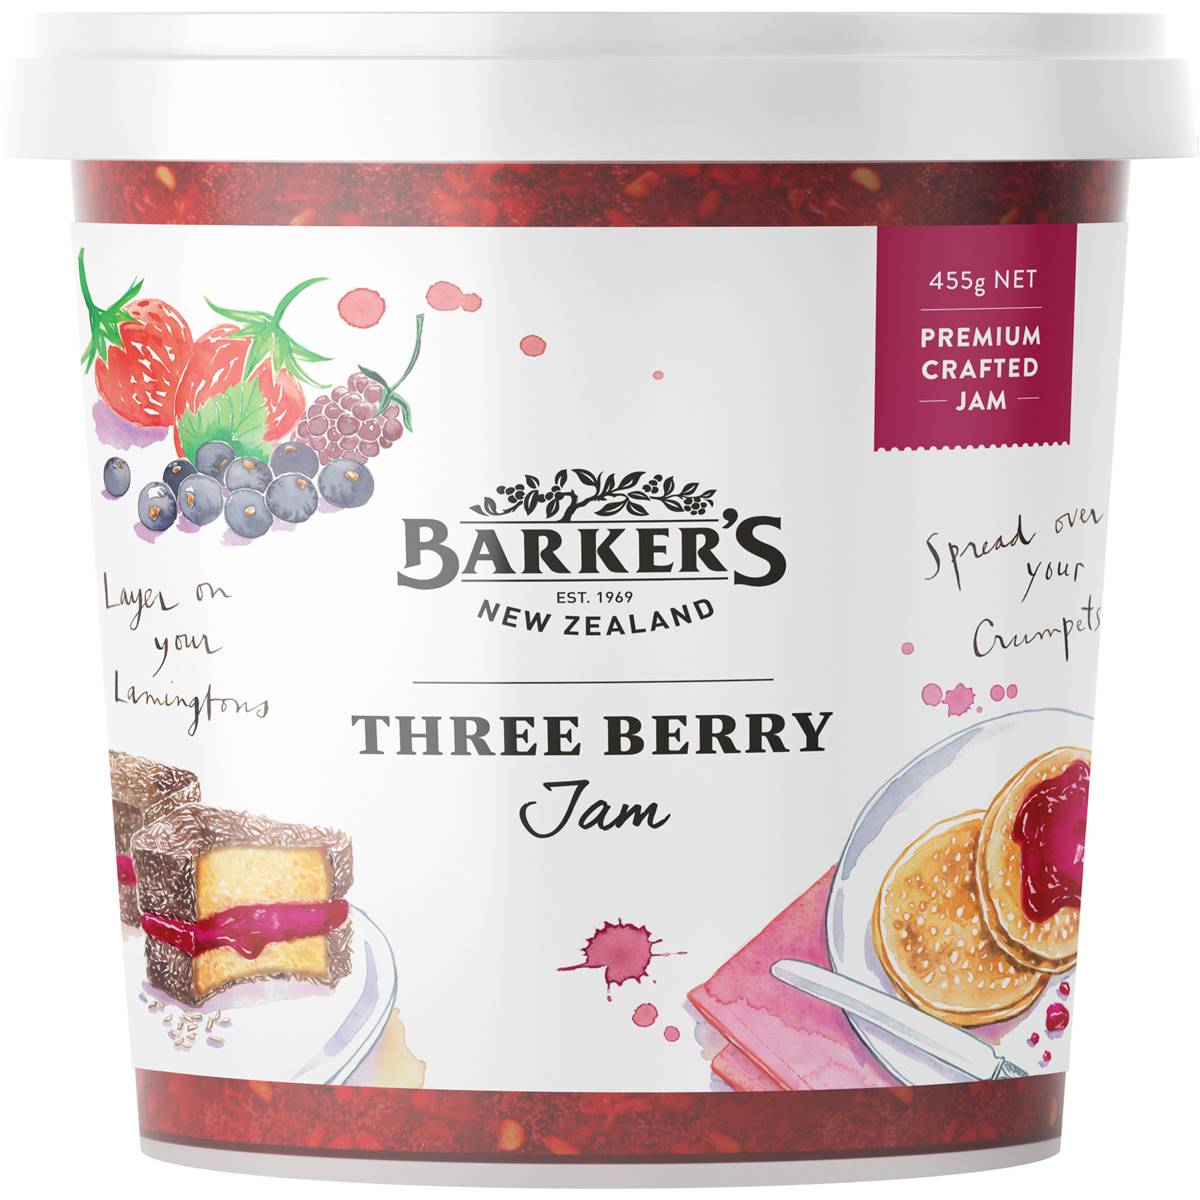 Calories in Barkers Anathoth Farm Three Berry Jam